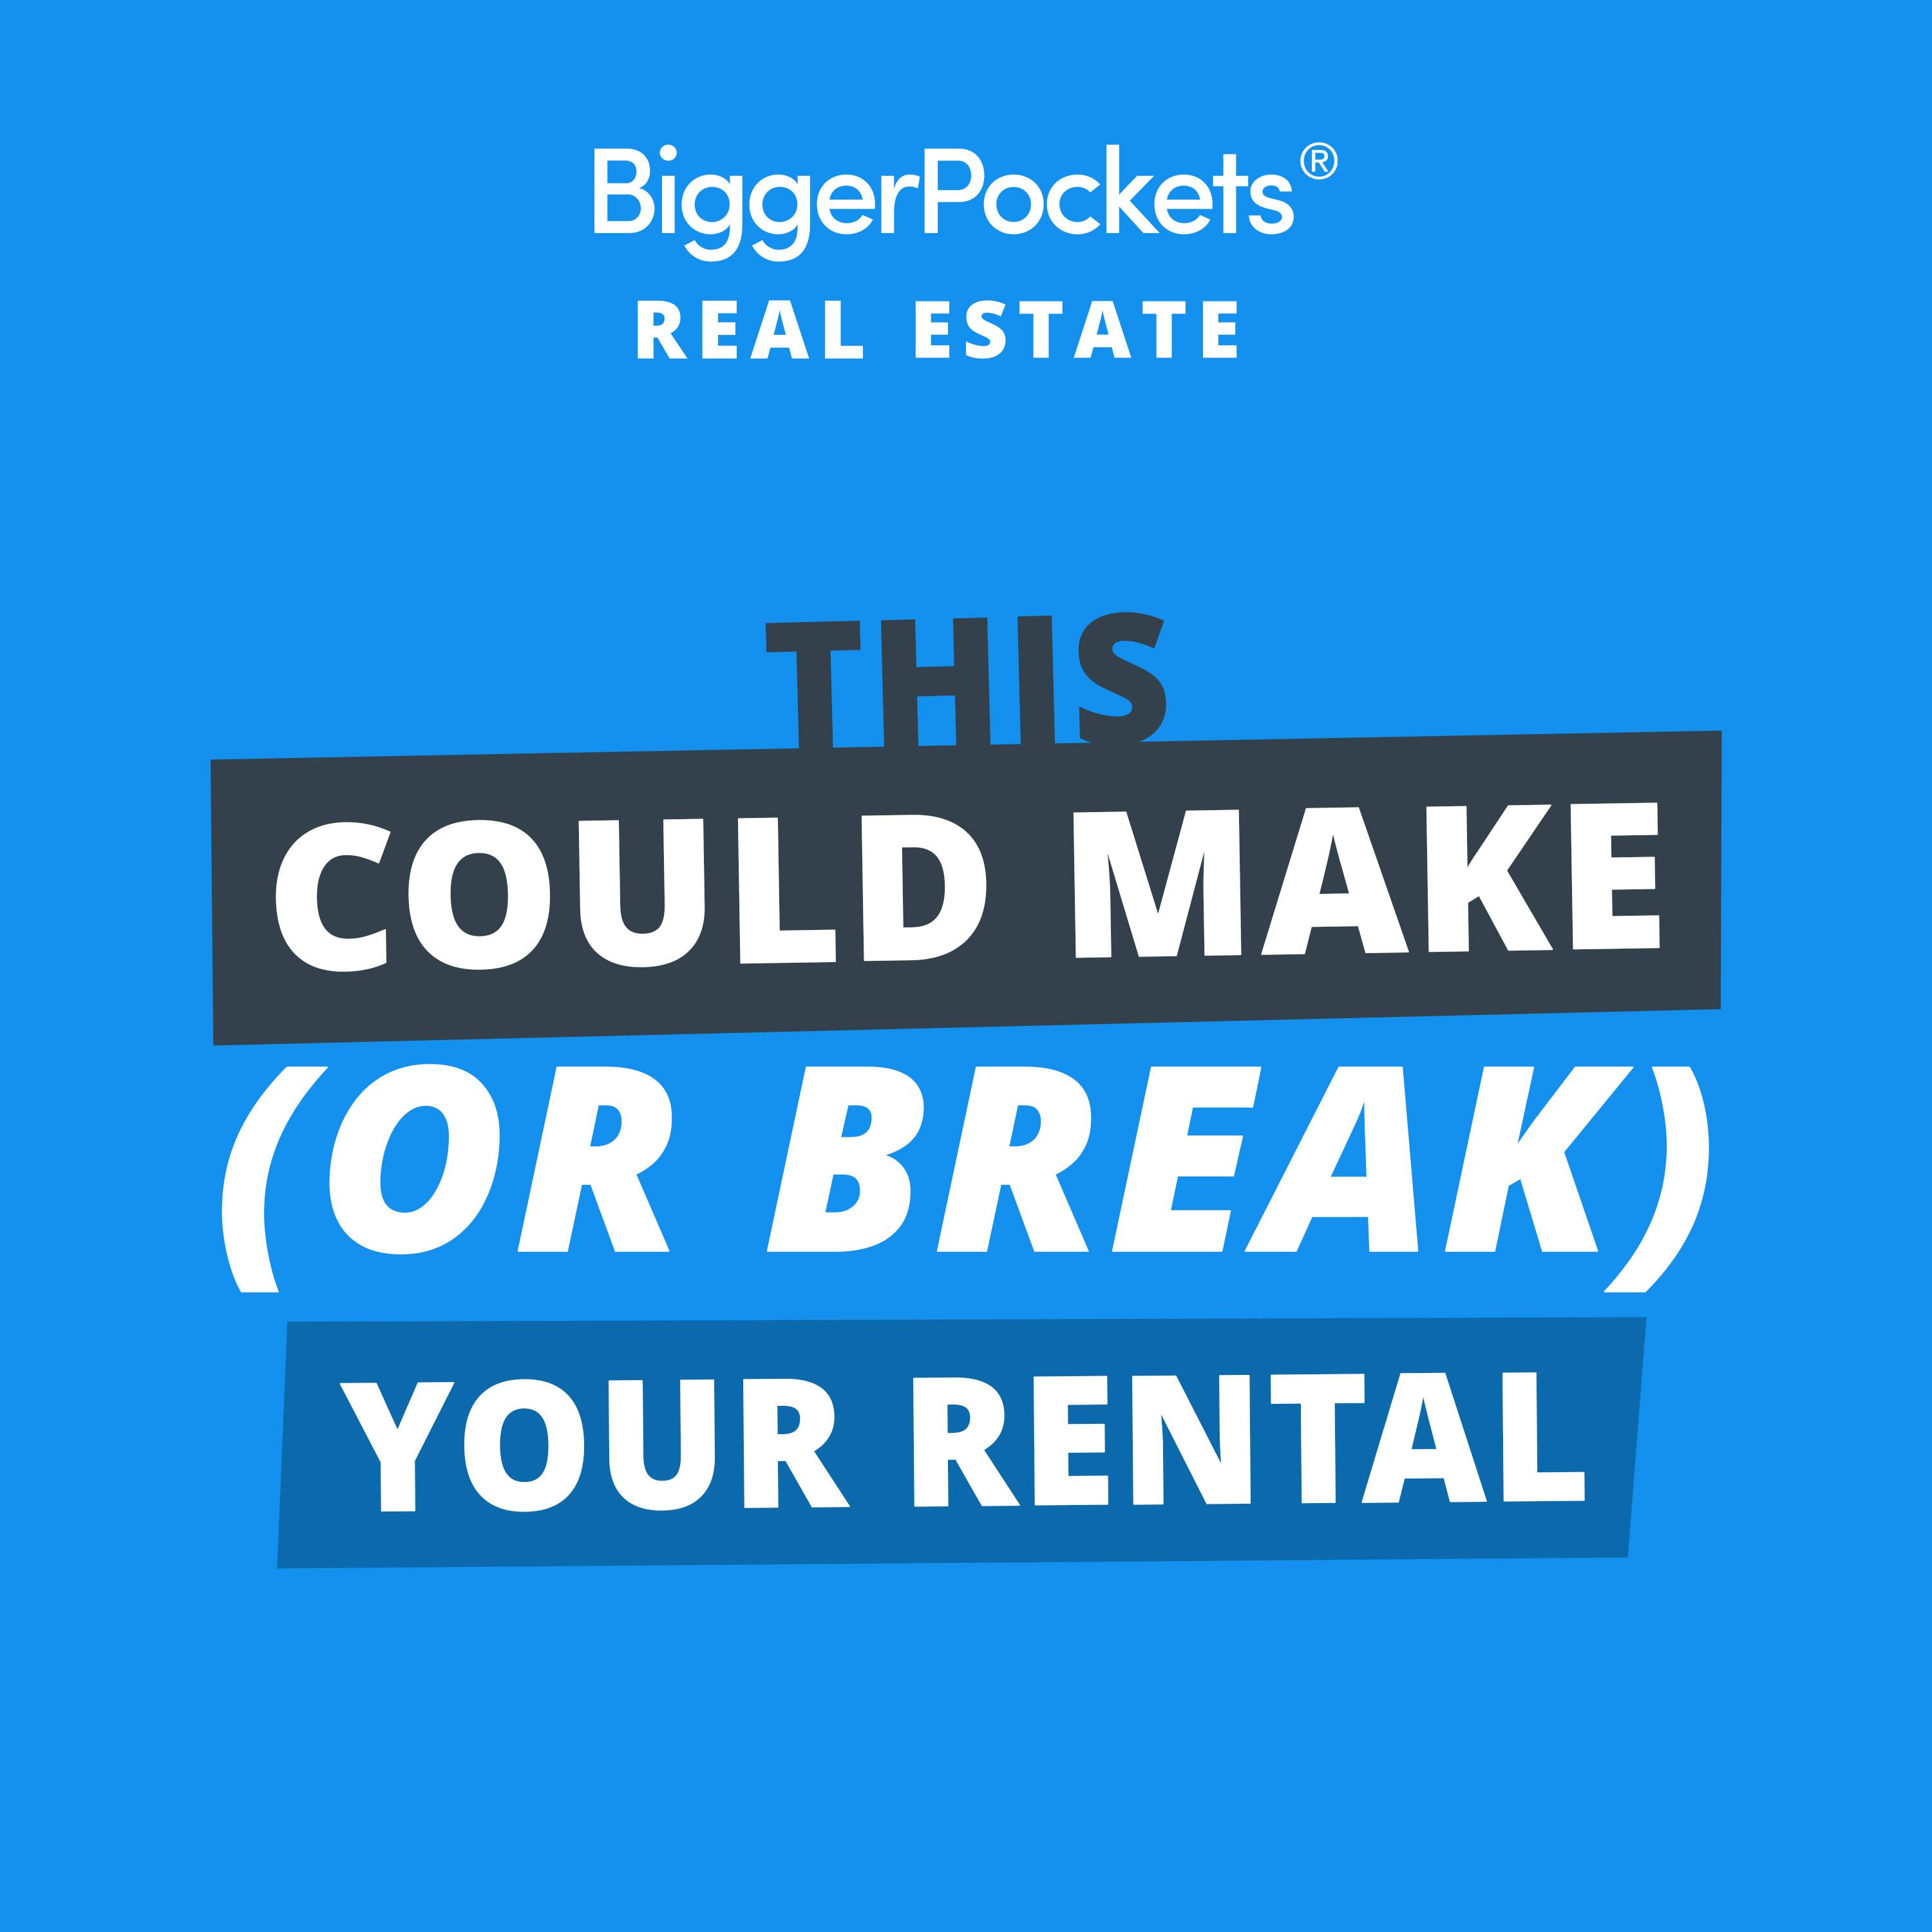 759: Seeing Greene: The ONE Factor That'll Make or Break Your Rental Property